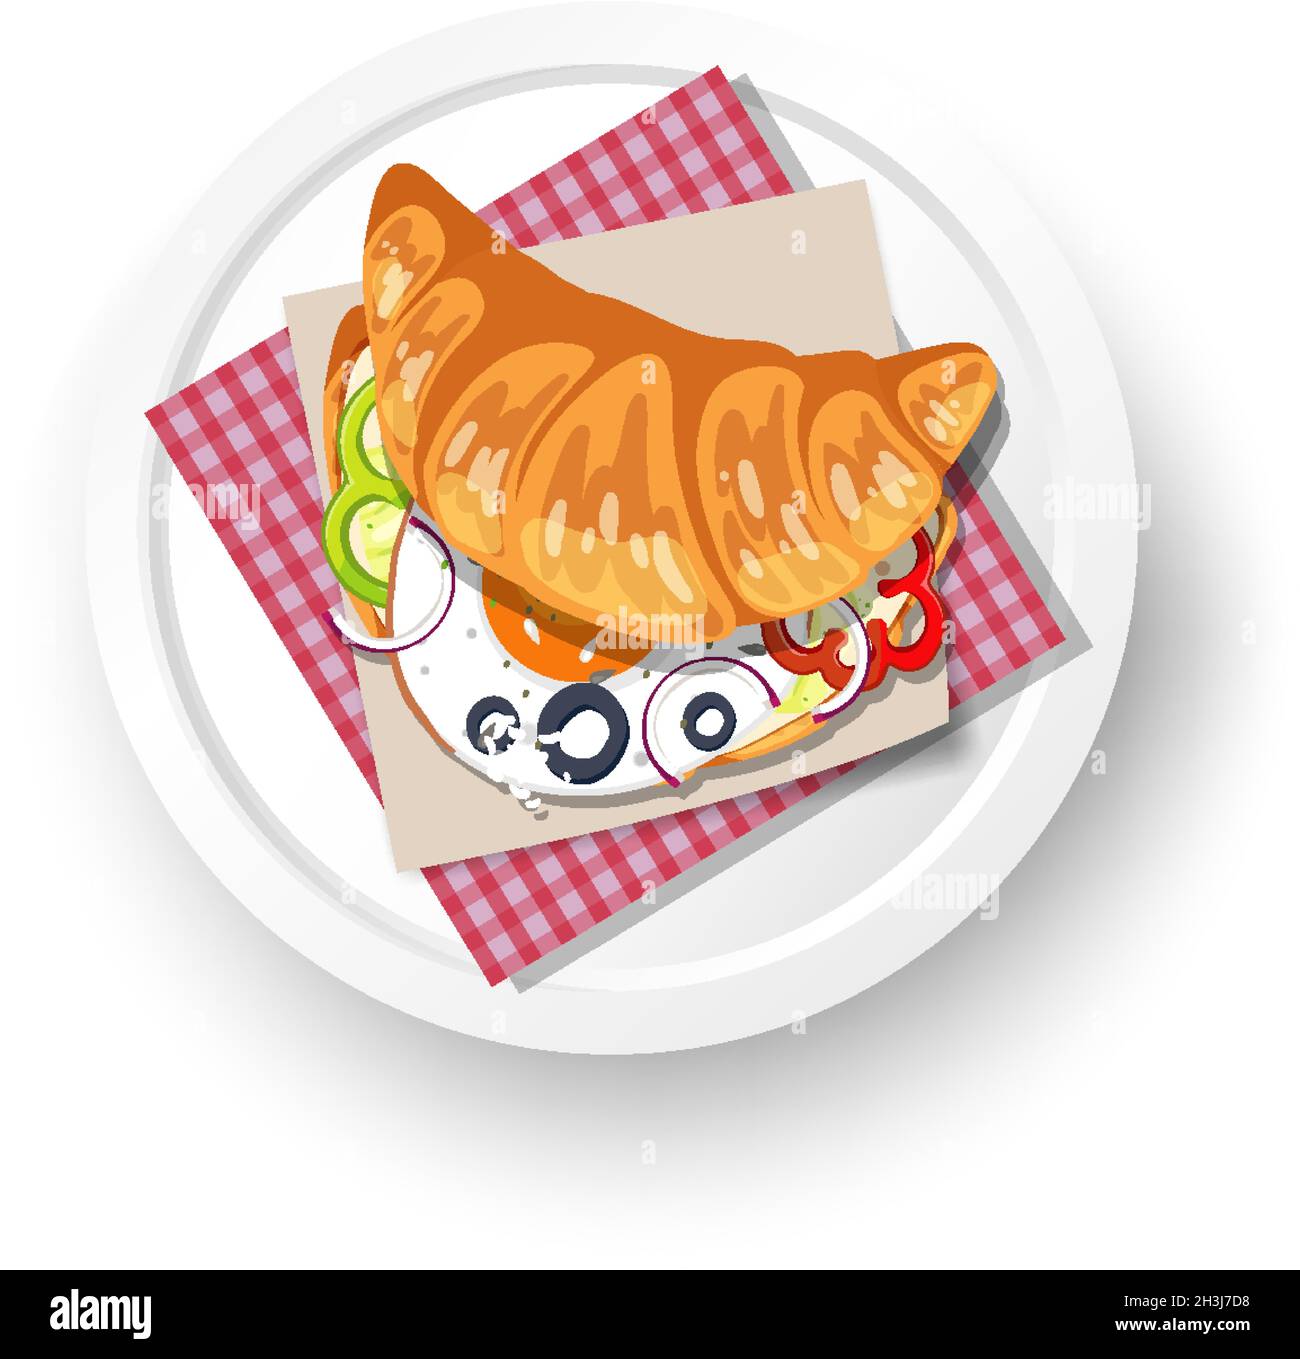 ham and cheese croissant clip art